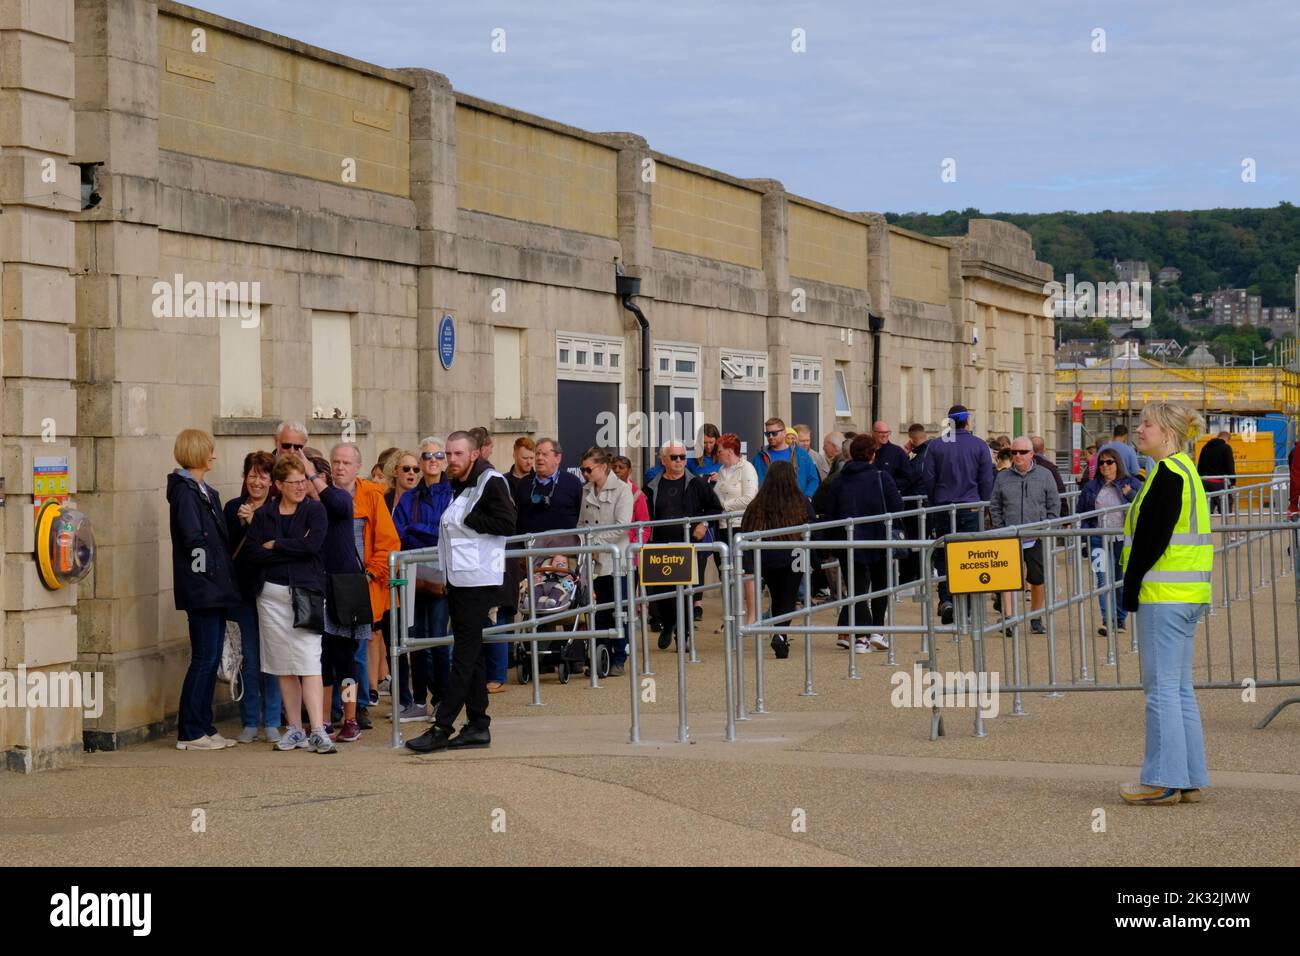 Weston-super-Mare, UK. 24th Sep, 2022. Queing for entry. Government funded artwork See Monster opens after months of delays. A July opening was originally planned. See Monster is an art installation made from a retired oil rig re-assembled on the beach at Weston. The artwork is part of Unboxed a UK Government funded showcase of British creativity once thought to be the festival of Brexit. Credit: JMF News/ Alamy Live News Stock Photo